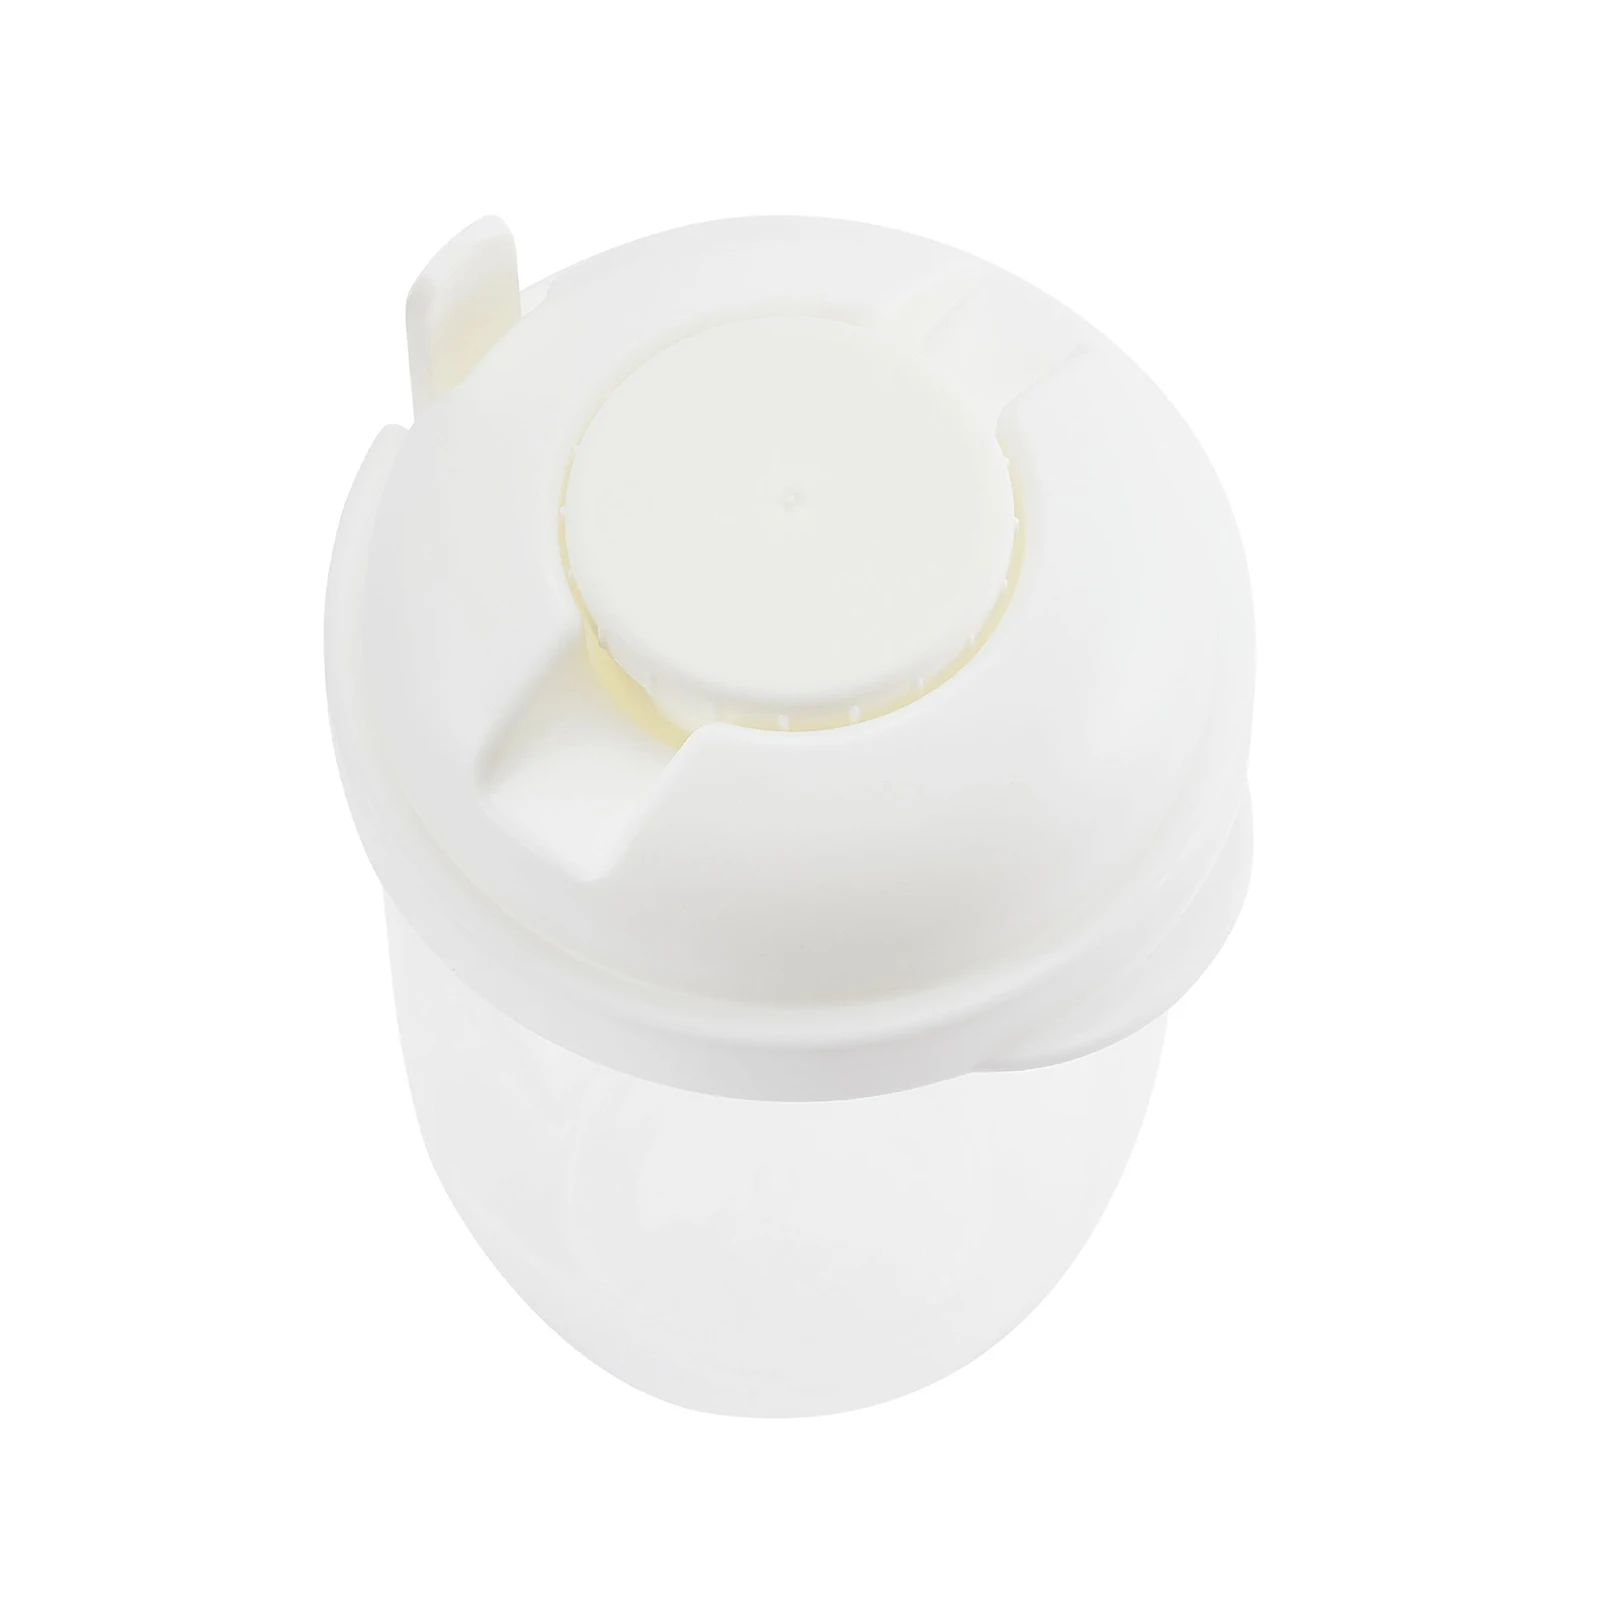 https://ae01.alicdn.com/kf/Sff9647dd03754938b702646ba71df62b3/Fresh-Salad-Container-to-Go-Container-Set-Fork-Serving-Cup-Picnic-Lunch-Salad-Bowl-Meal-Shaker.jpg